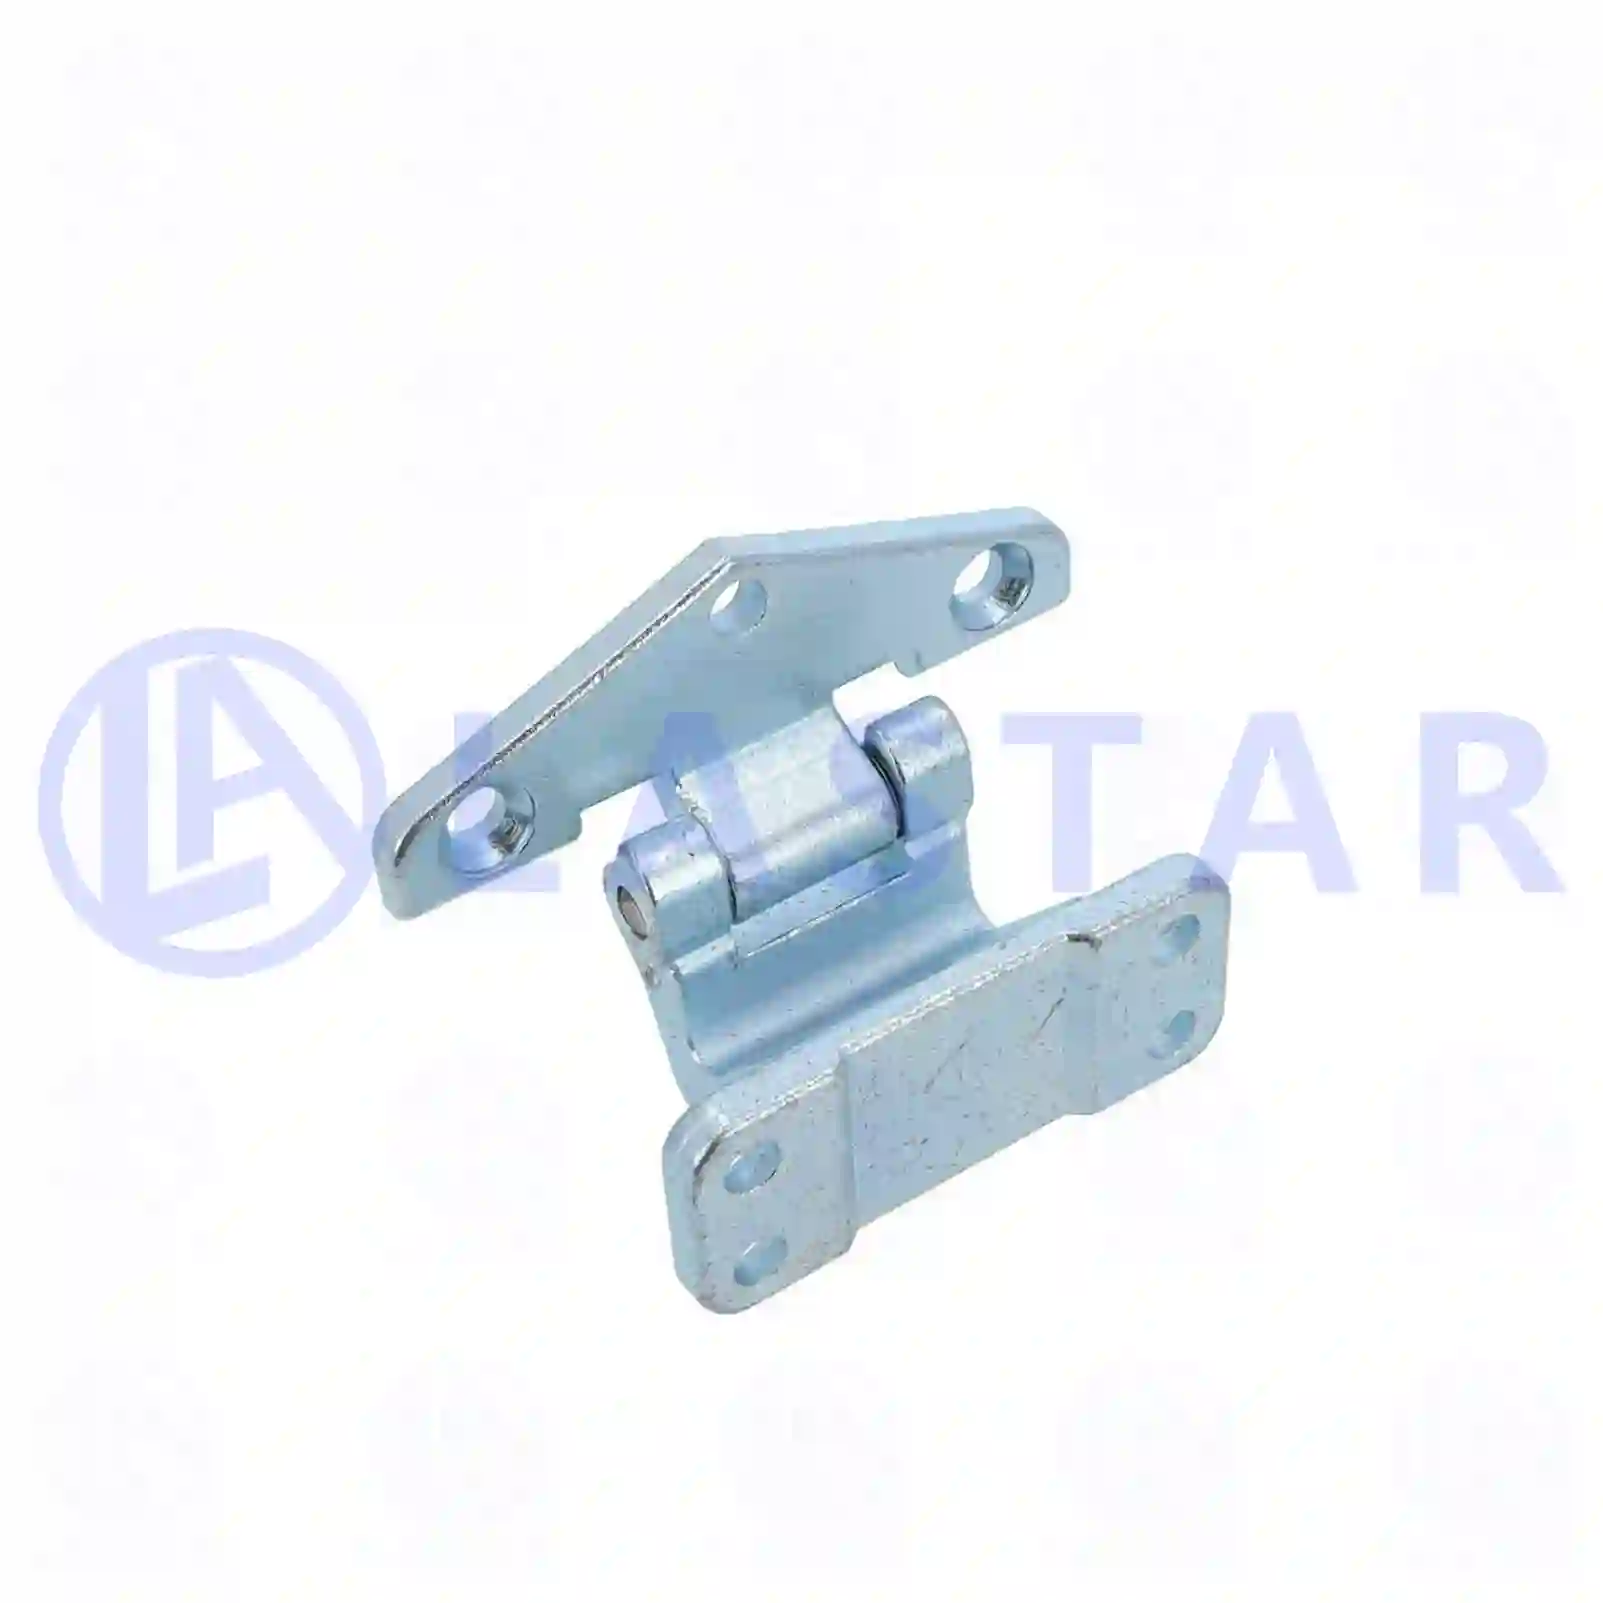 Hinge, lower, 77721172, 20372039, ZG60887-0008 ||  77721172 Lastar Spare Part | Truck Spare Parts, Auotomotive Spare Parts Hinge, lower, 77721172, 20372039, ZG60887-0008 ||  77721172 Lastar Spare Part | Truck Spare Parts, Auotomotive Spare Parts